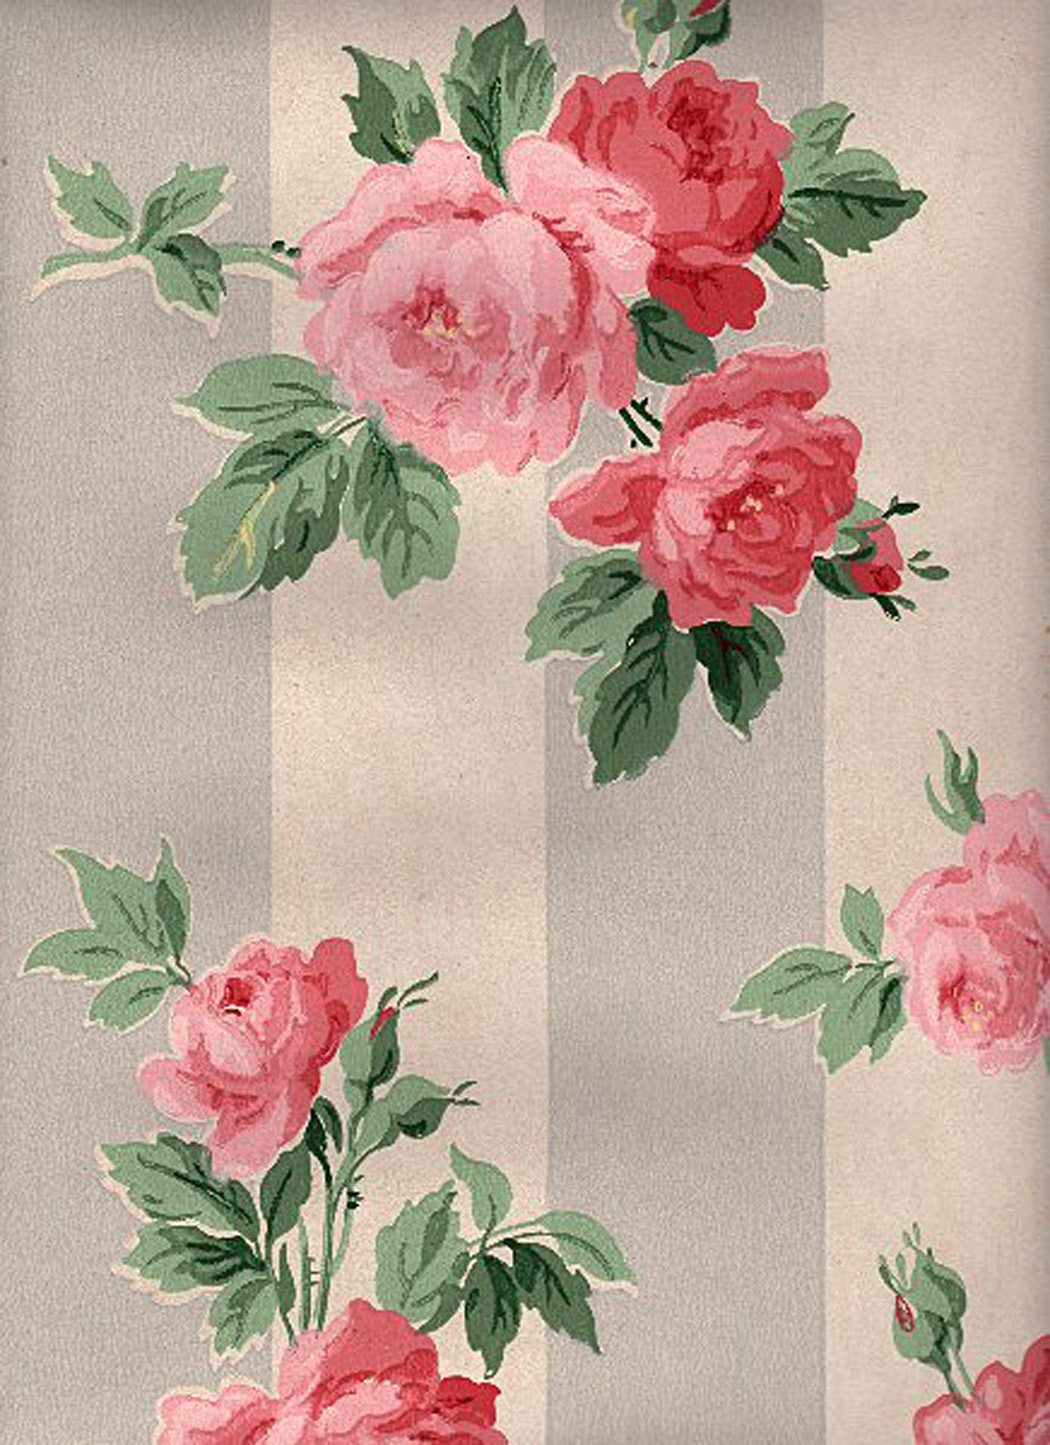 12 Vintage Wallpapers - Cabbage Roses and More - The Graphics Fairy